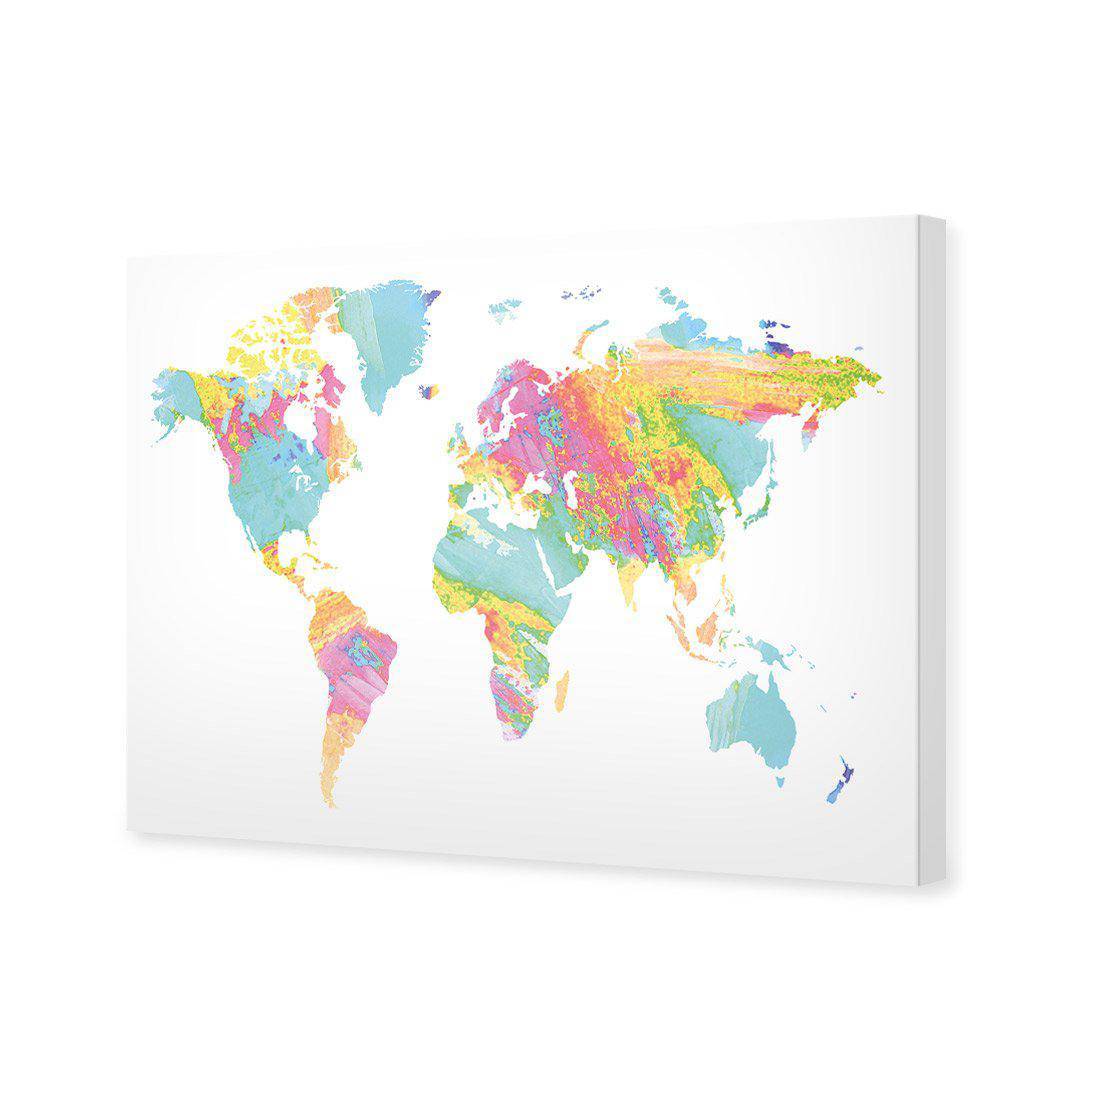 Painted Map Of The World, Pastel Canvas Art-Canvas-Wall Art Designs-45x30cm-Canvas - No Frame-Wall Art Designs